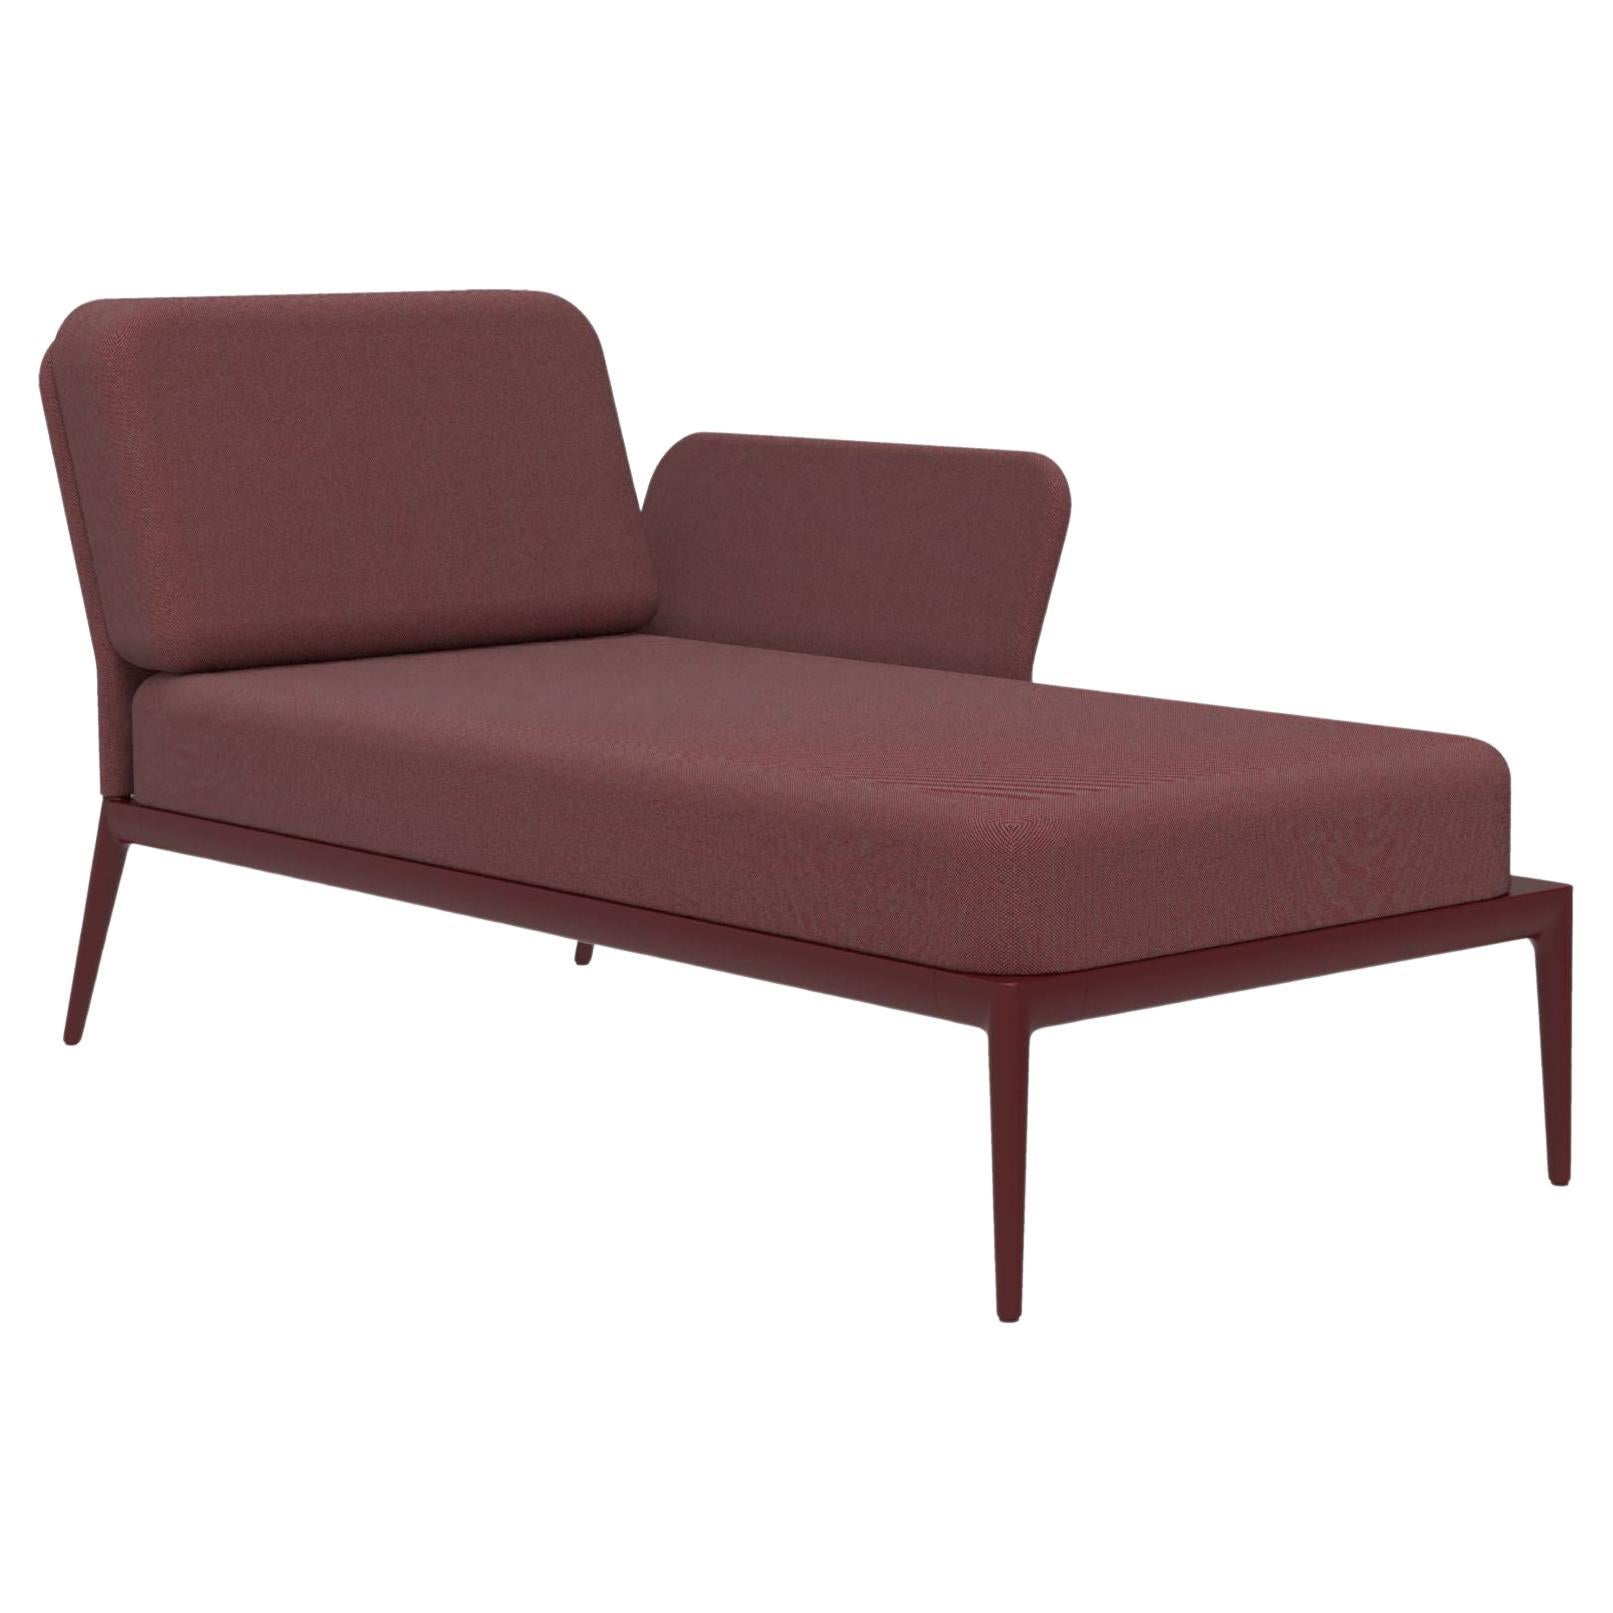 Cover Burgundy Left Chaise Longue by MOWEE